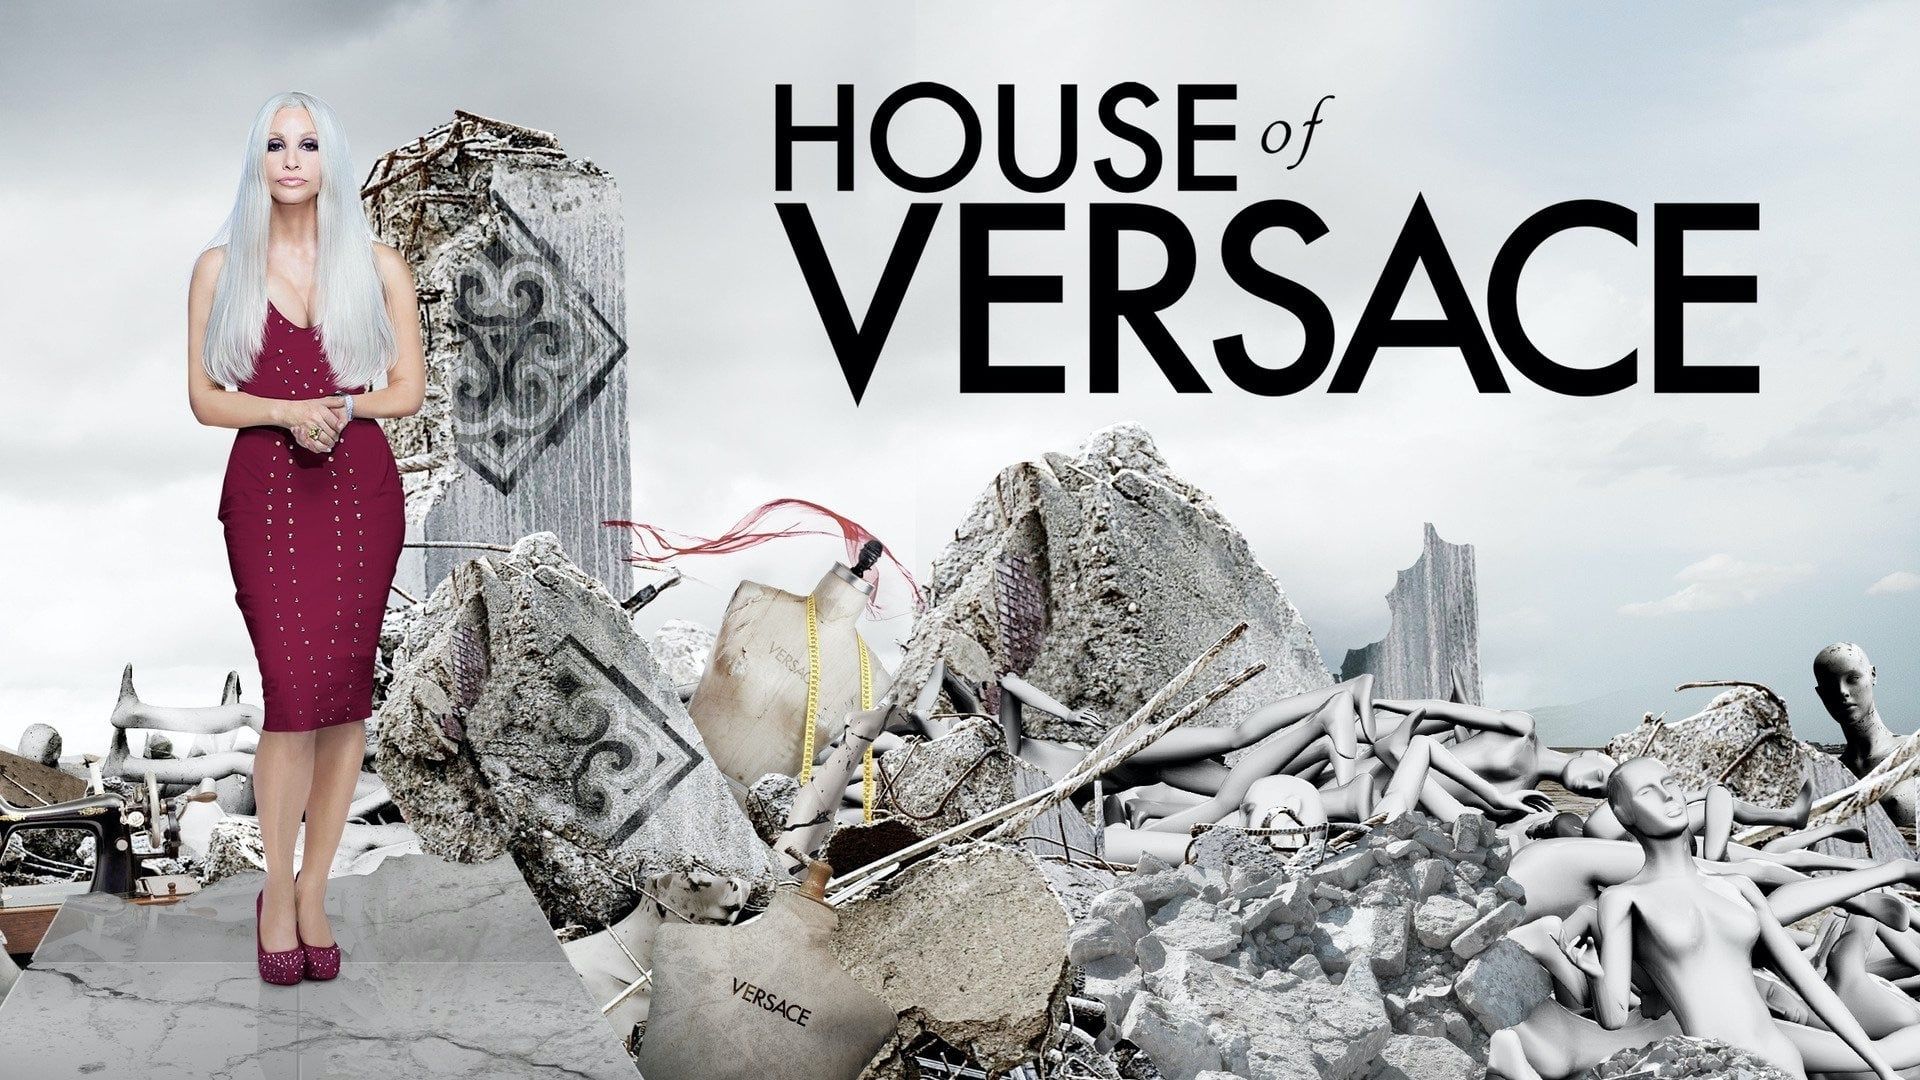 House of Versace background